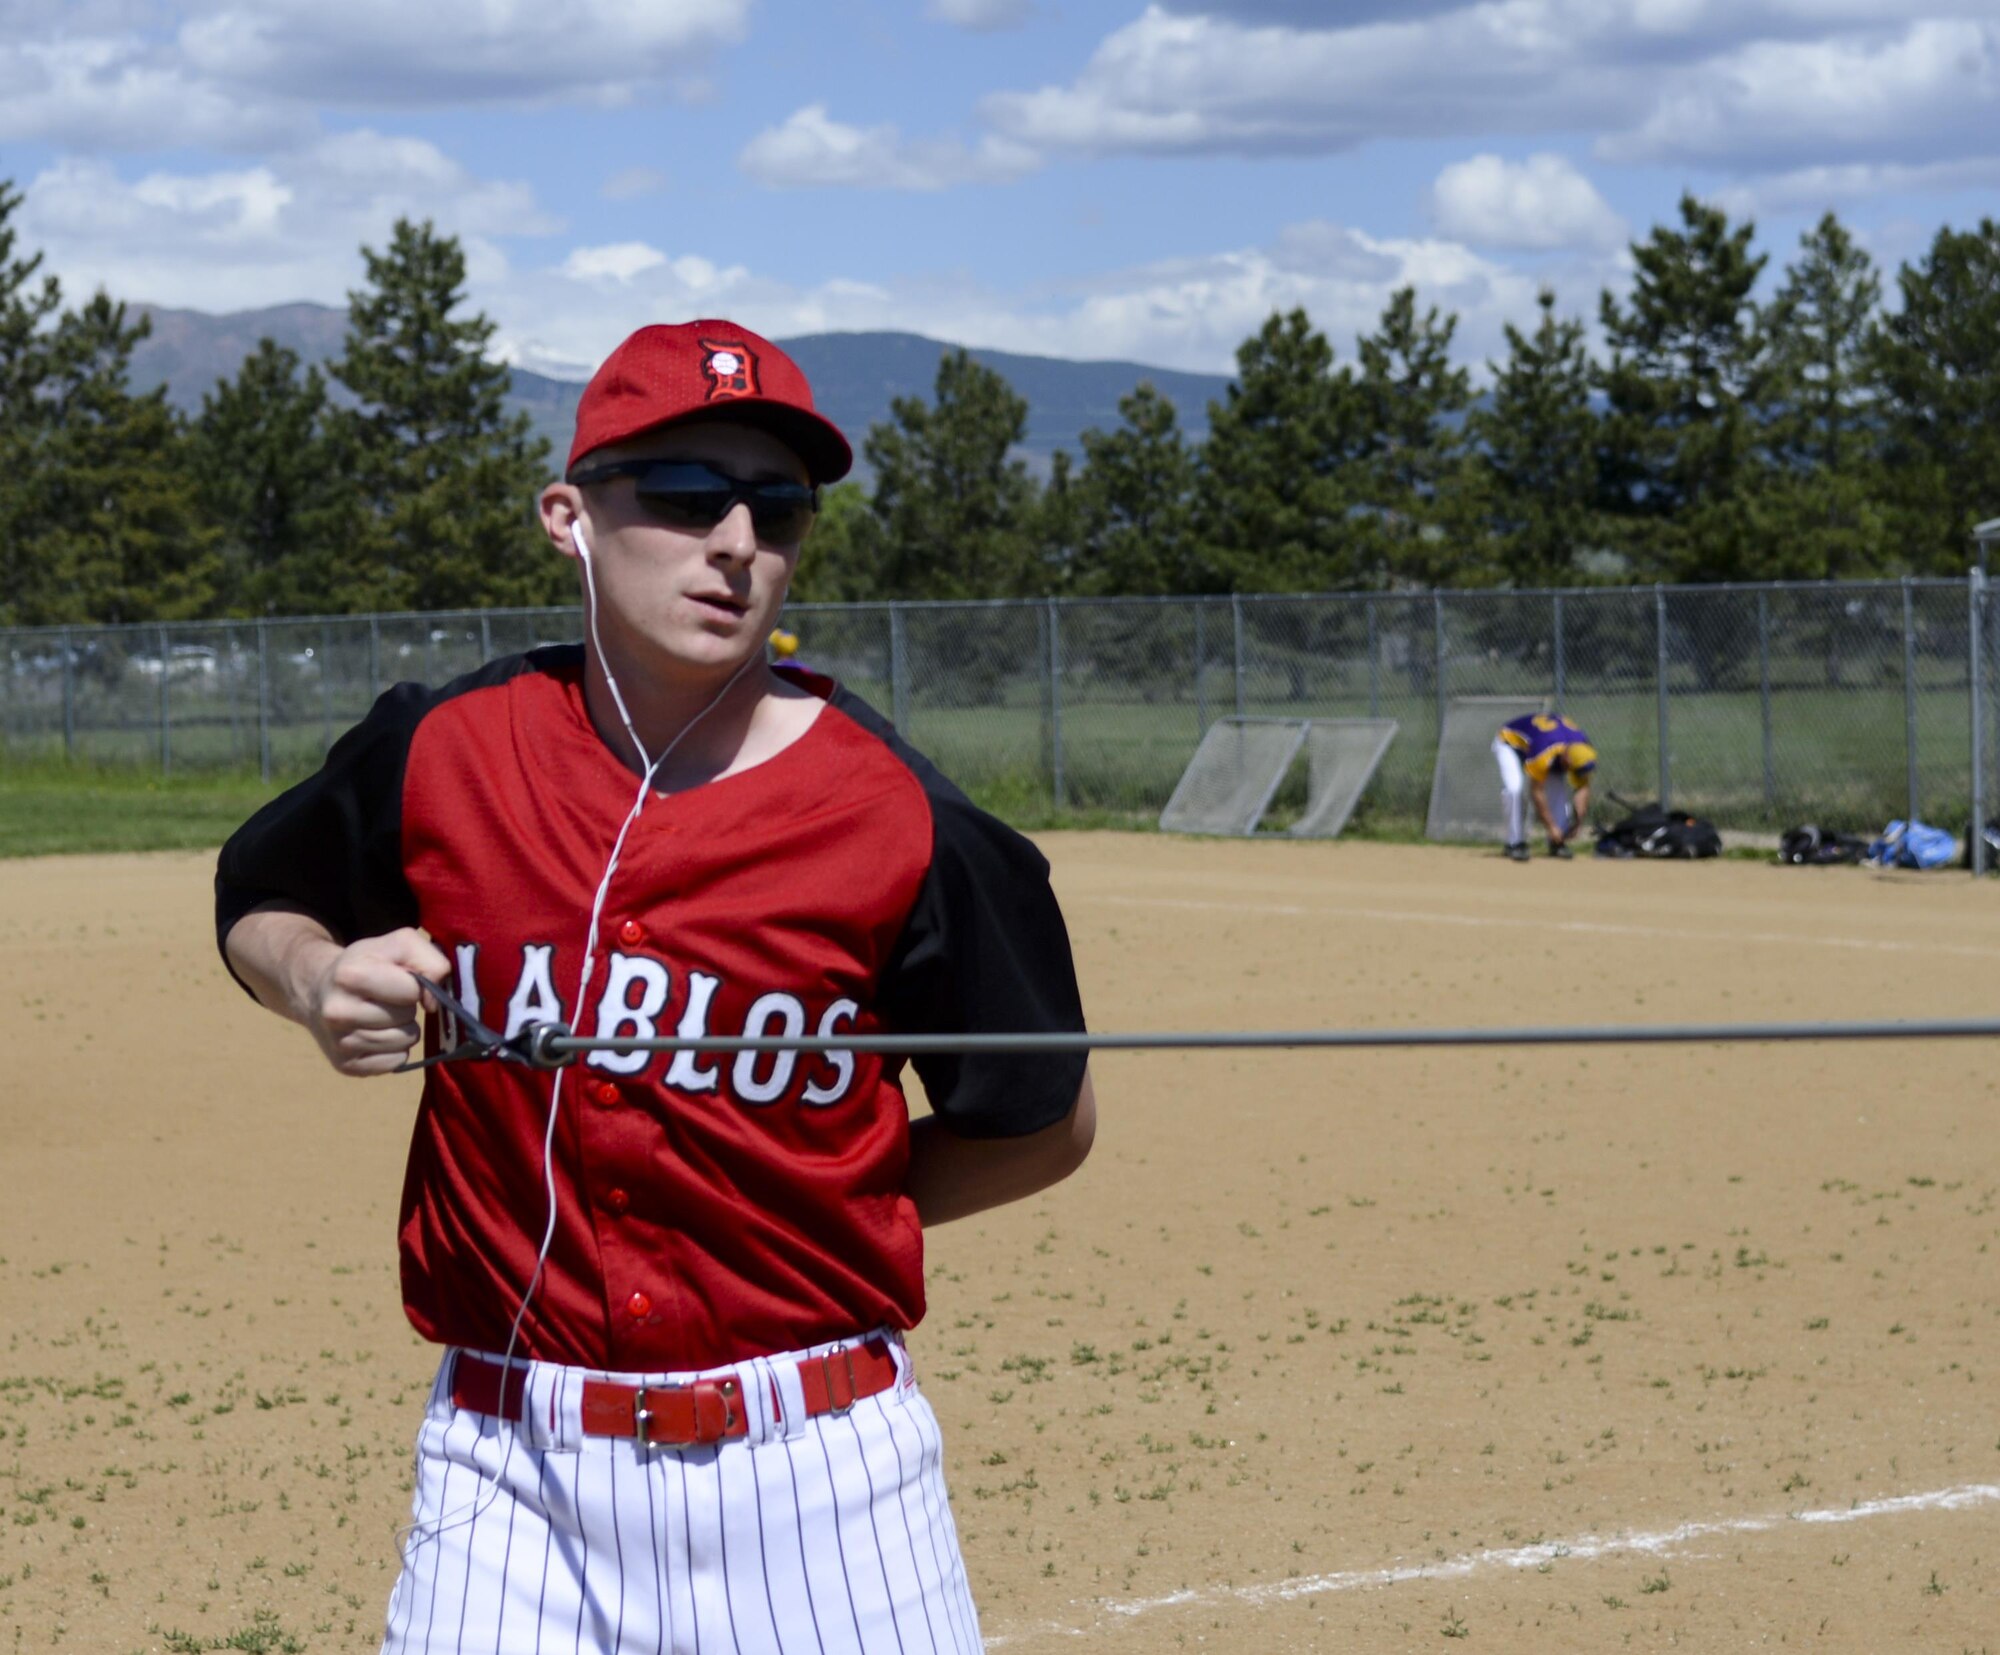 Senior Airman Devin Mooney, 321st Missile Squadron commander's support staff and Personnel Reliability Program monitor, warms up before a game with his Fort Collins league baseball team May 29, 2016, in a field in Colorado. Mooney will try out for a Major League Baseball team in June. (U.S. Air Force photo by Senior Airman Jason Wiese)